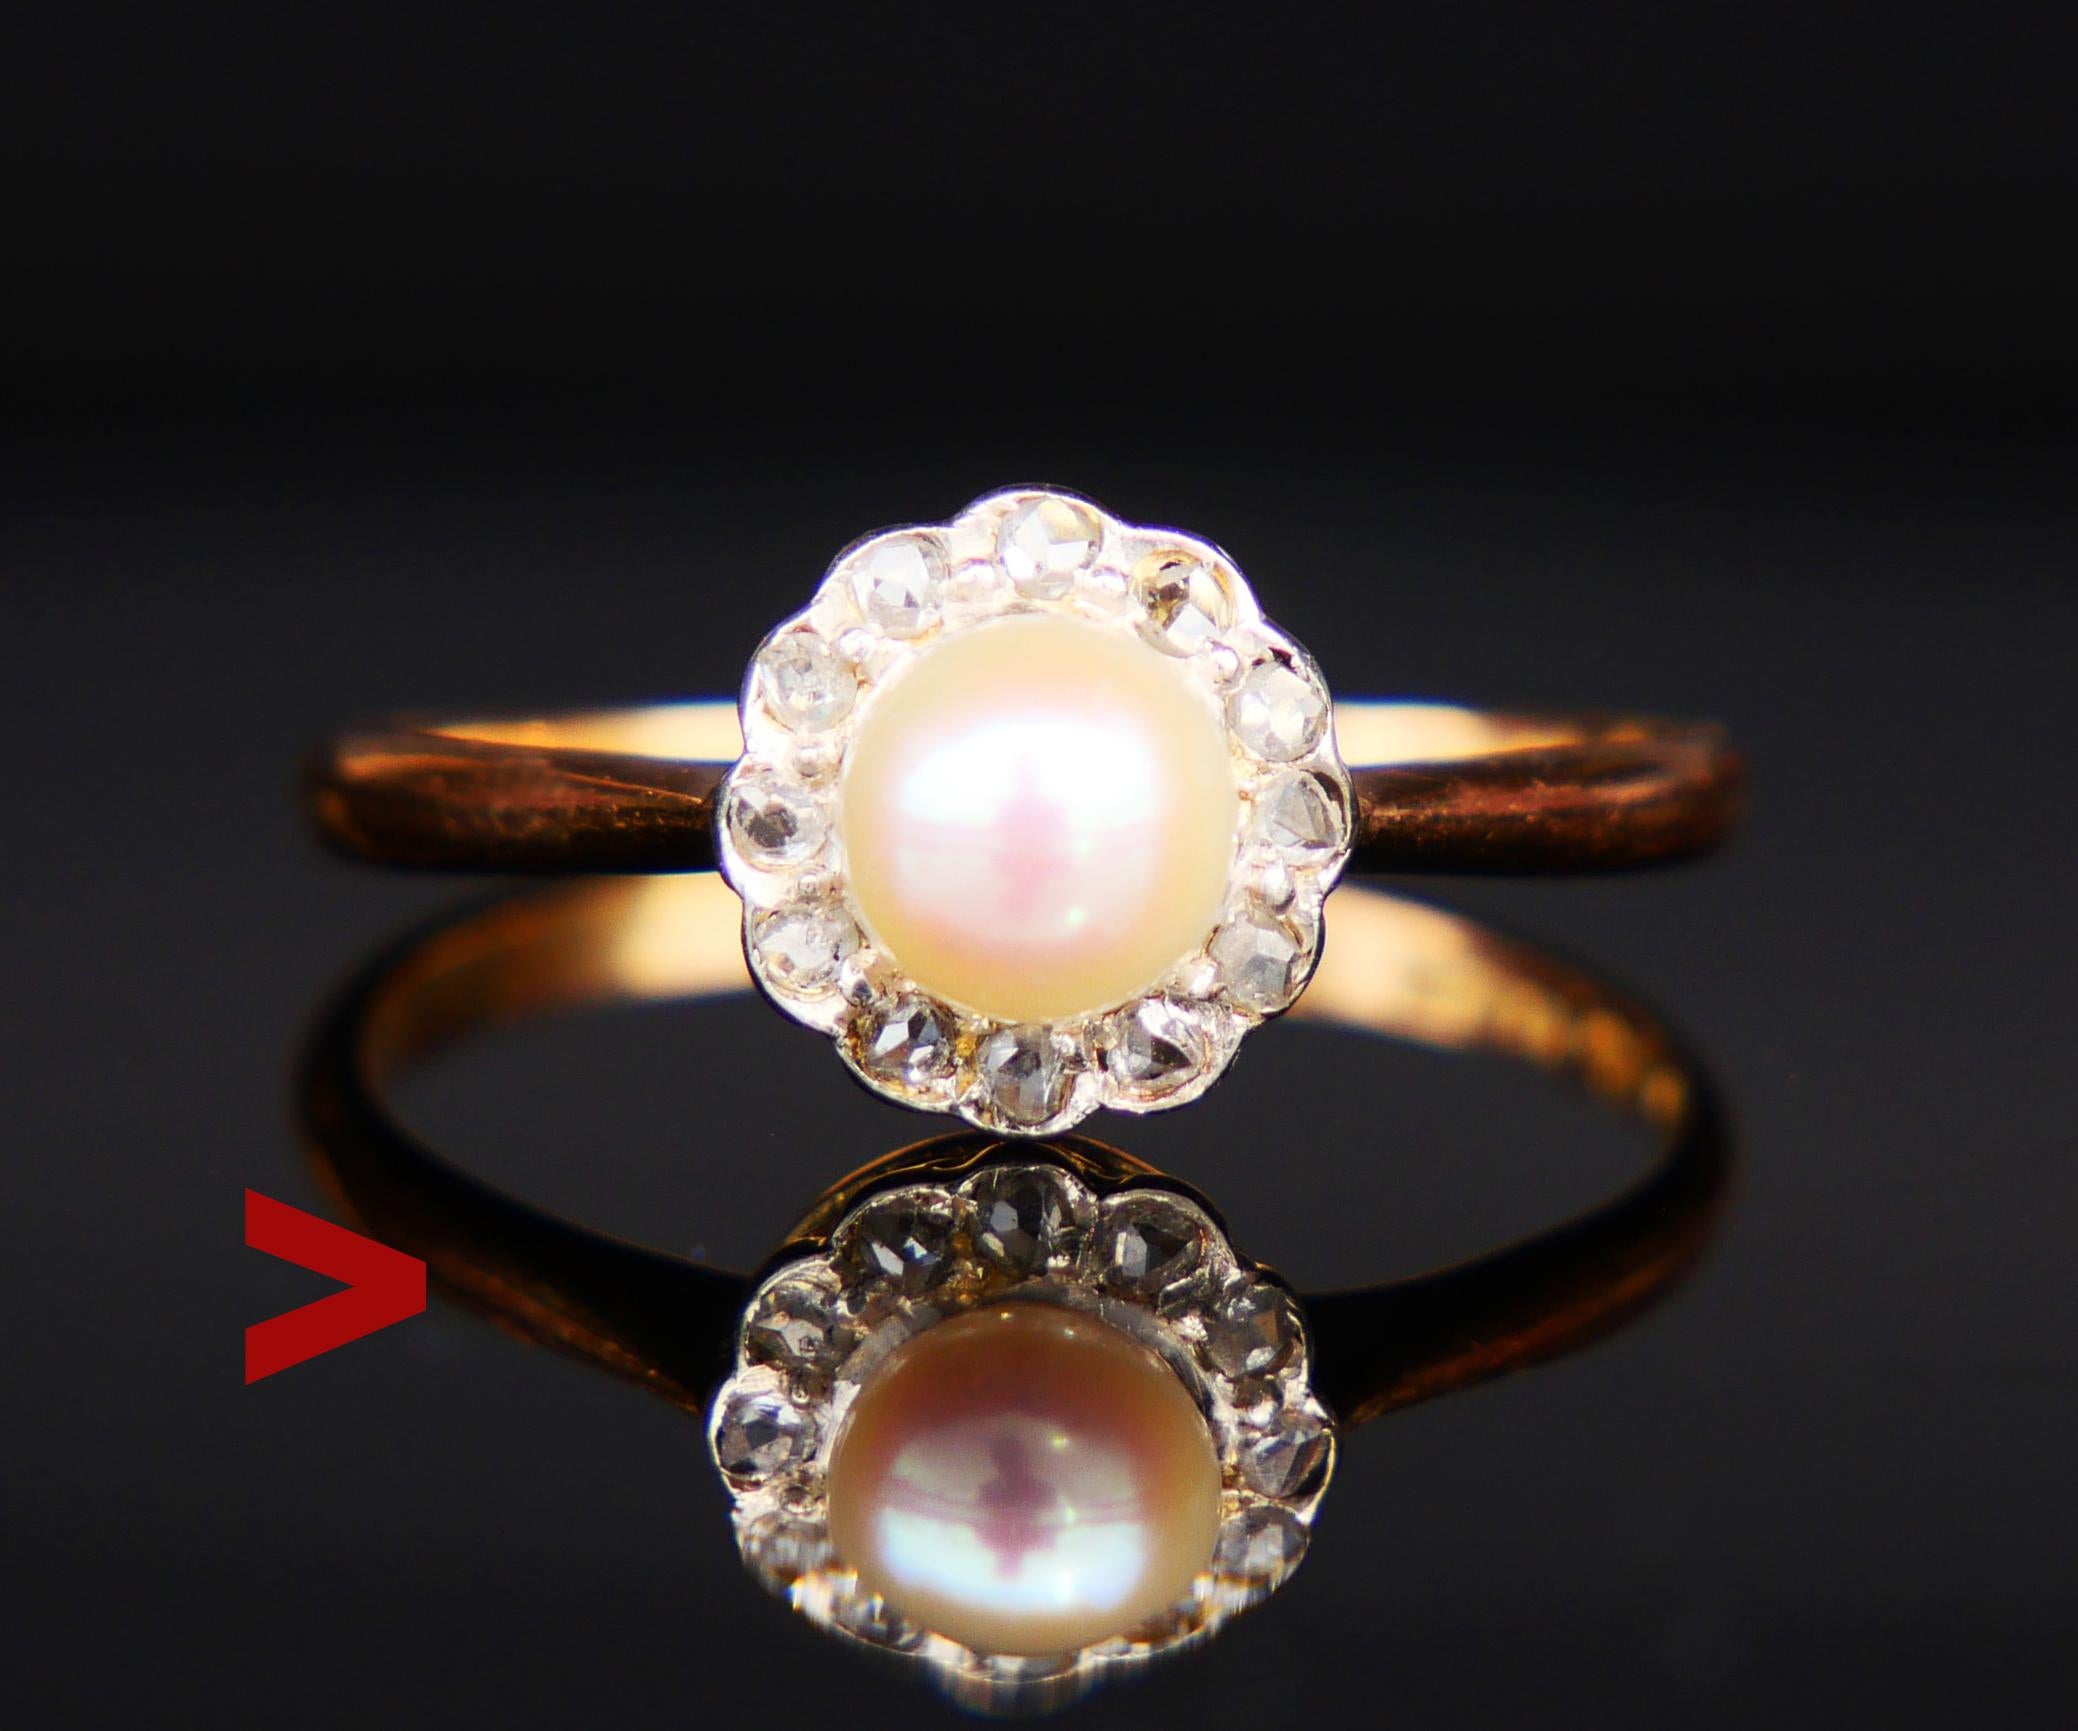 Old Swedish Wedding Halo Ring made in 1920.

Band and crown in solid 18K Yellow Gold. Cultured Sea Pearl Ø 5 mm in claws accented with 12 rose cut Diamonds Ø 1.5 mm /0.015 ct each with open backs. Clear stones without visible inclusions . Total